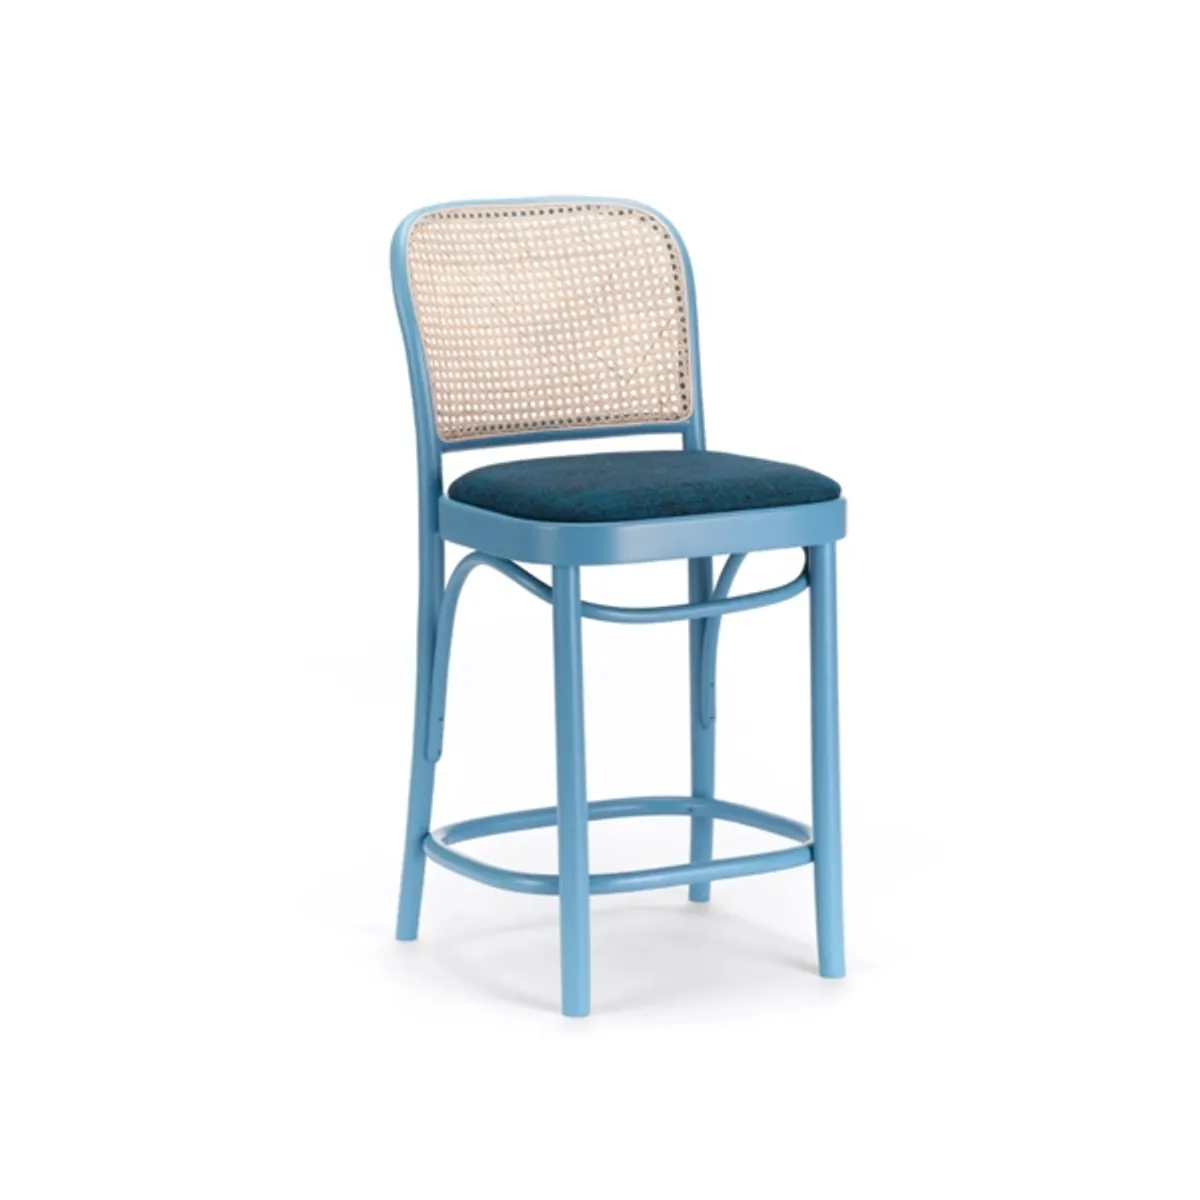 Bombay soft bar stool Inside Out Contracts3